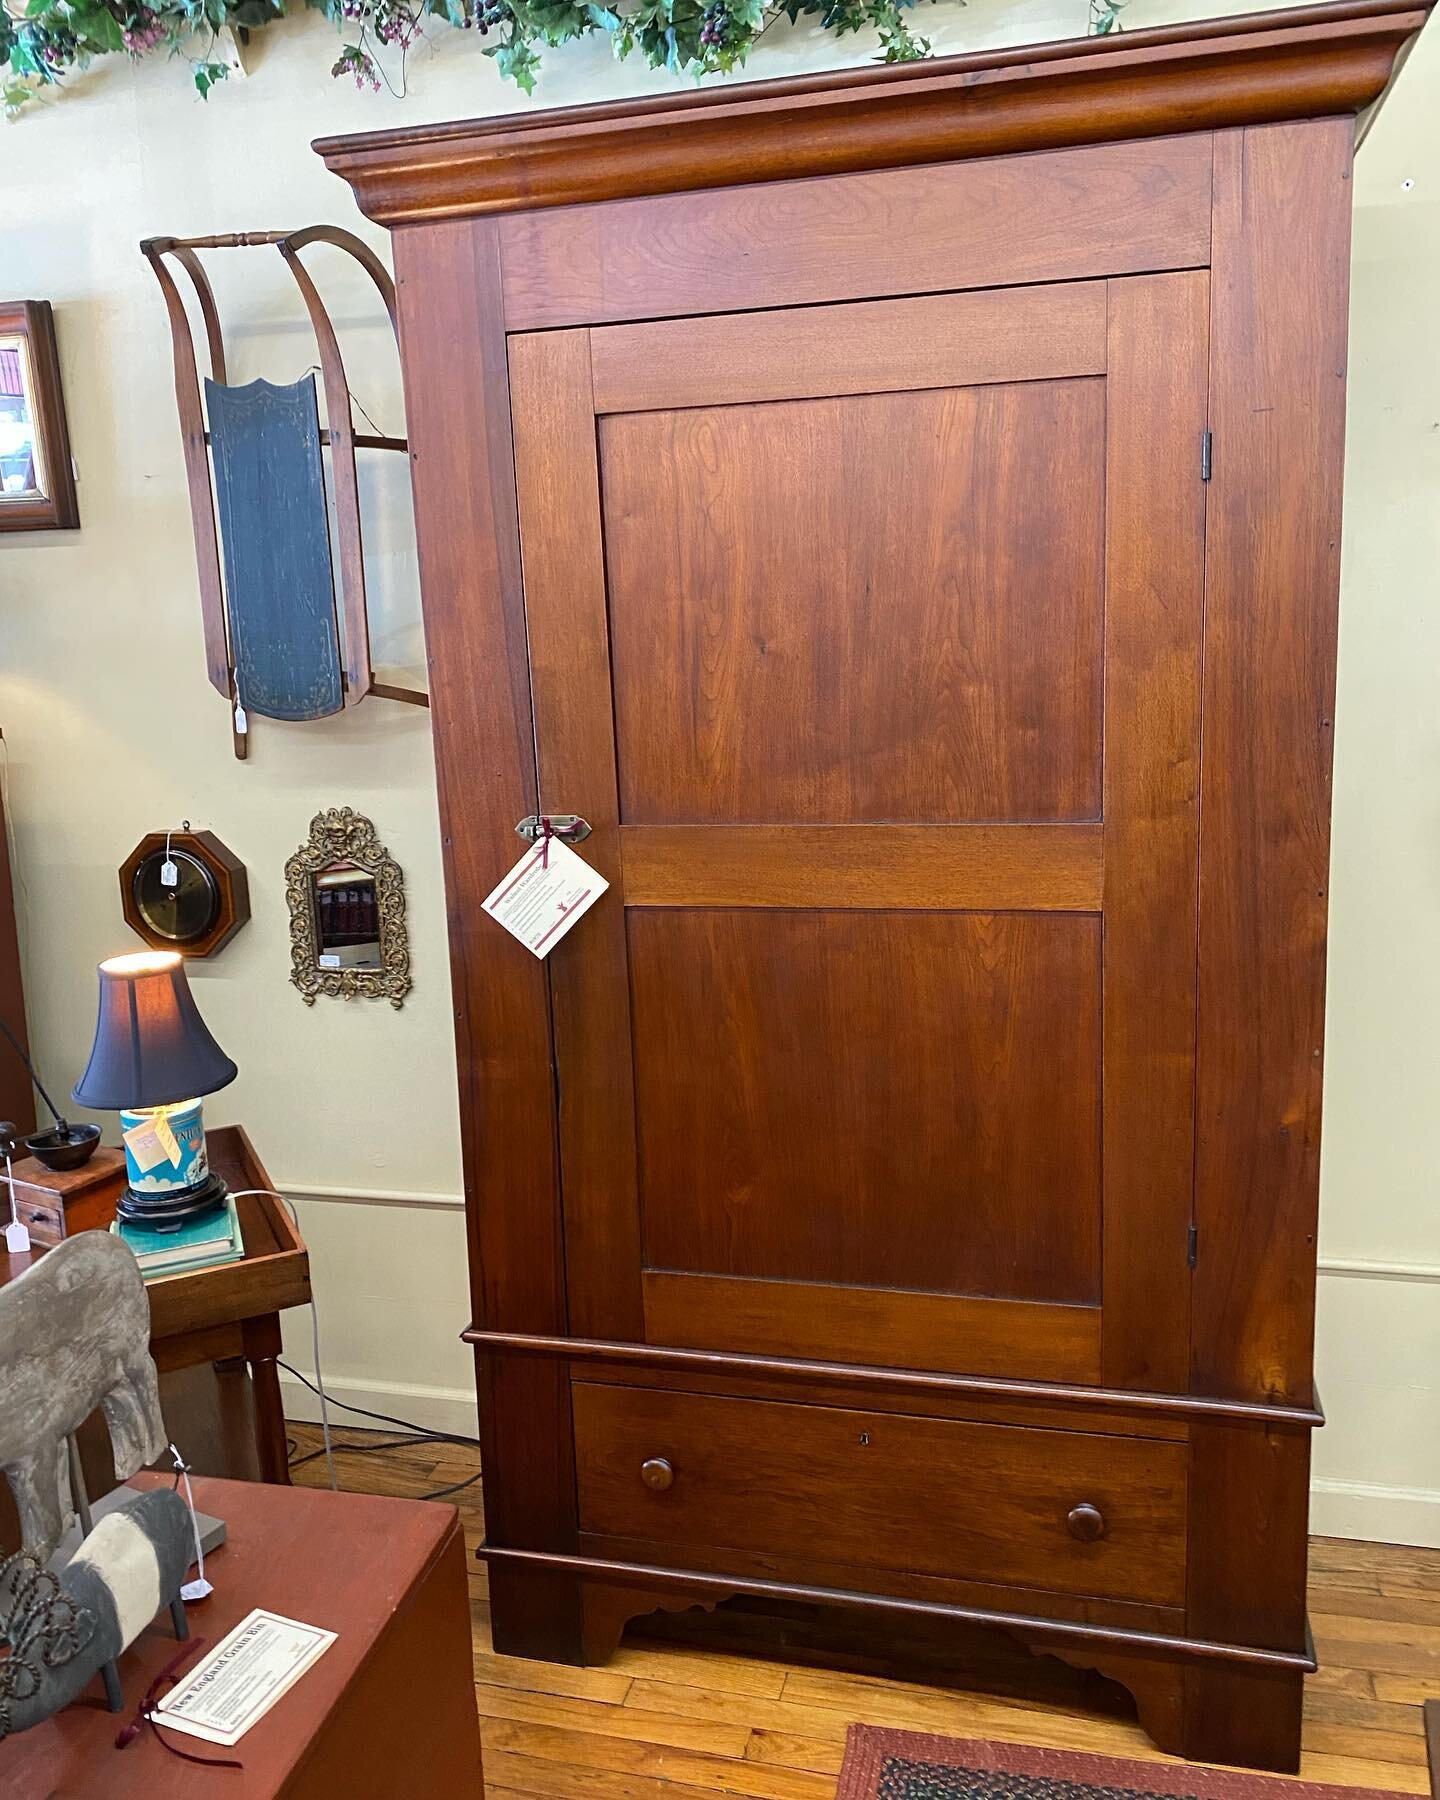 Walnut wardrobe&hellip;. Circa mid to late 1800s&hellip;. Exceptional condition! Offered by The Antique Market in Clinton Tennessee&hellip;.